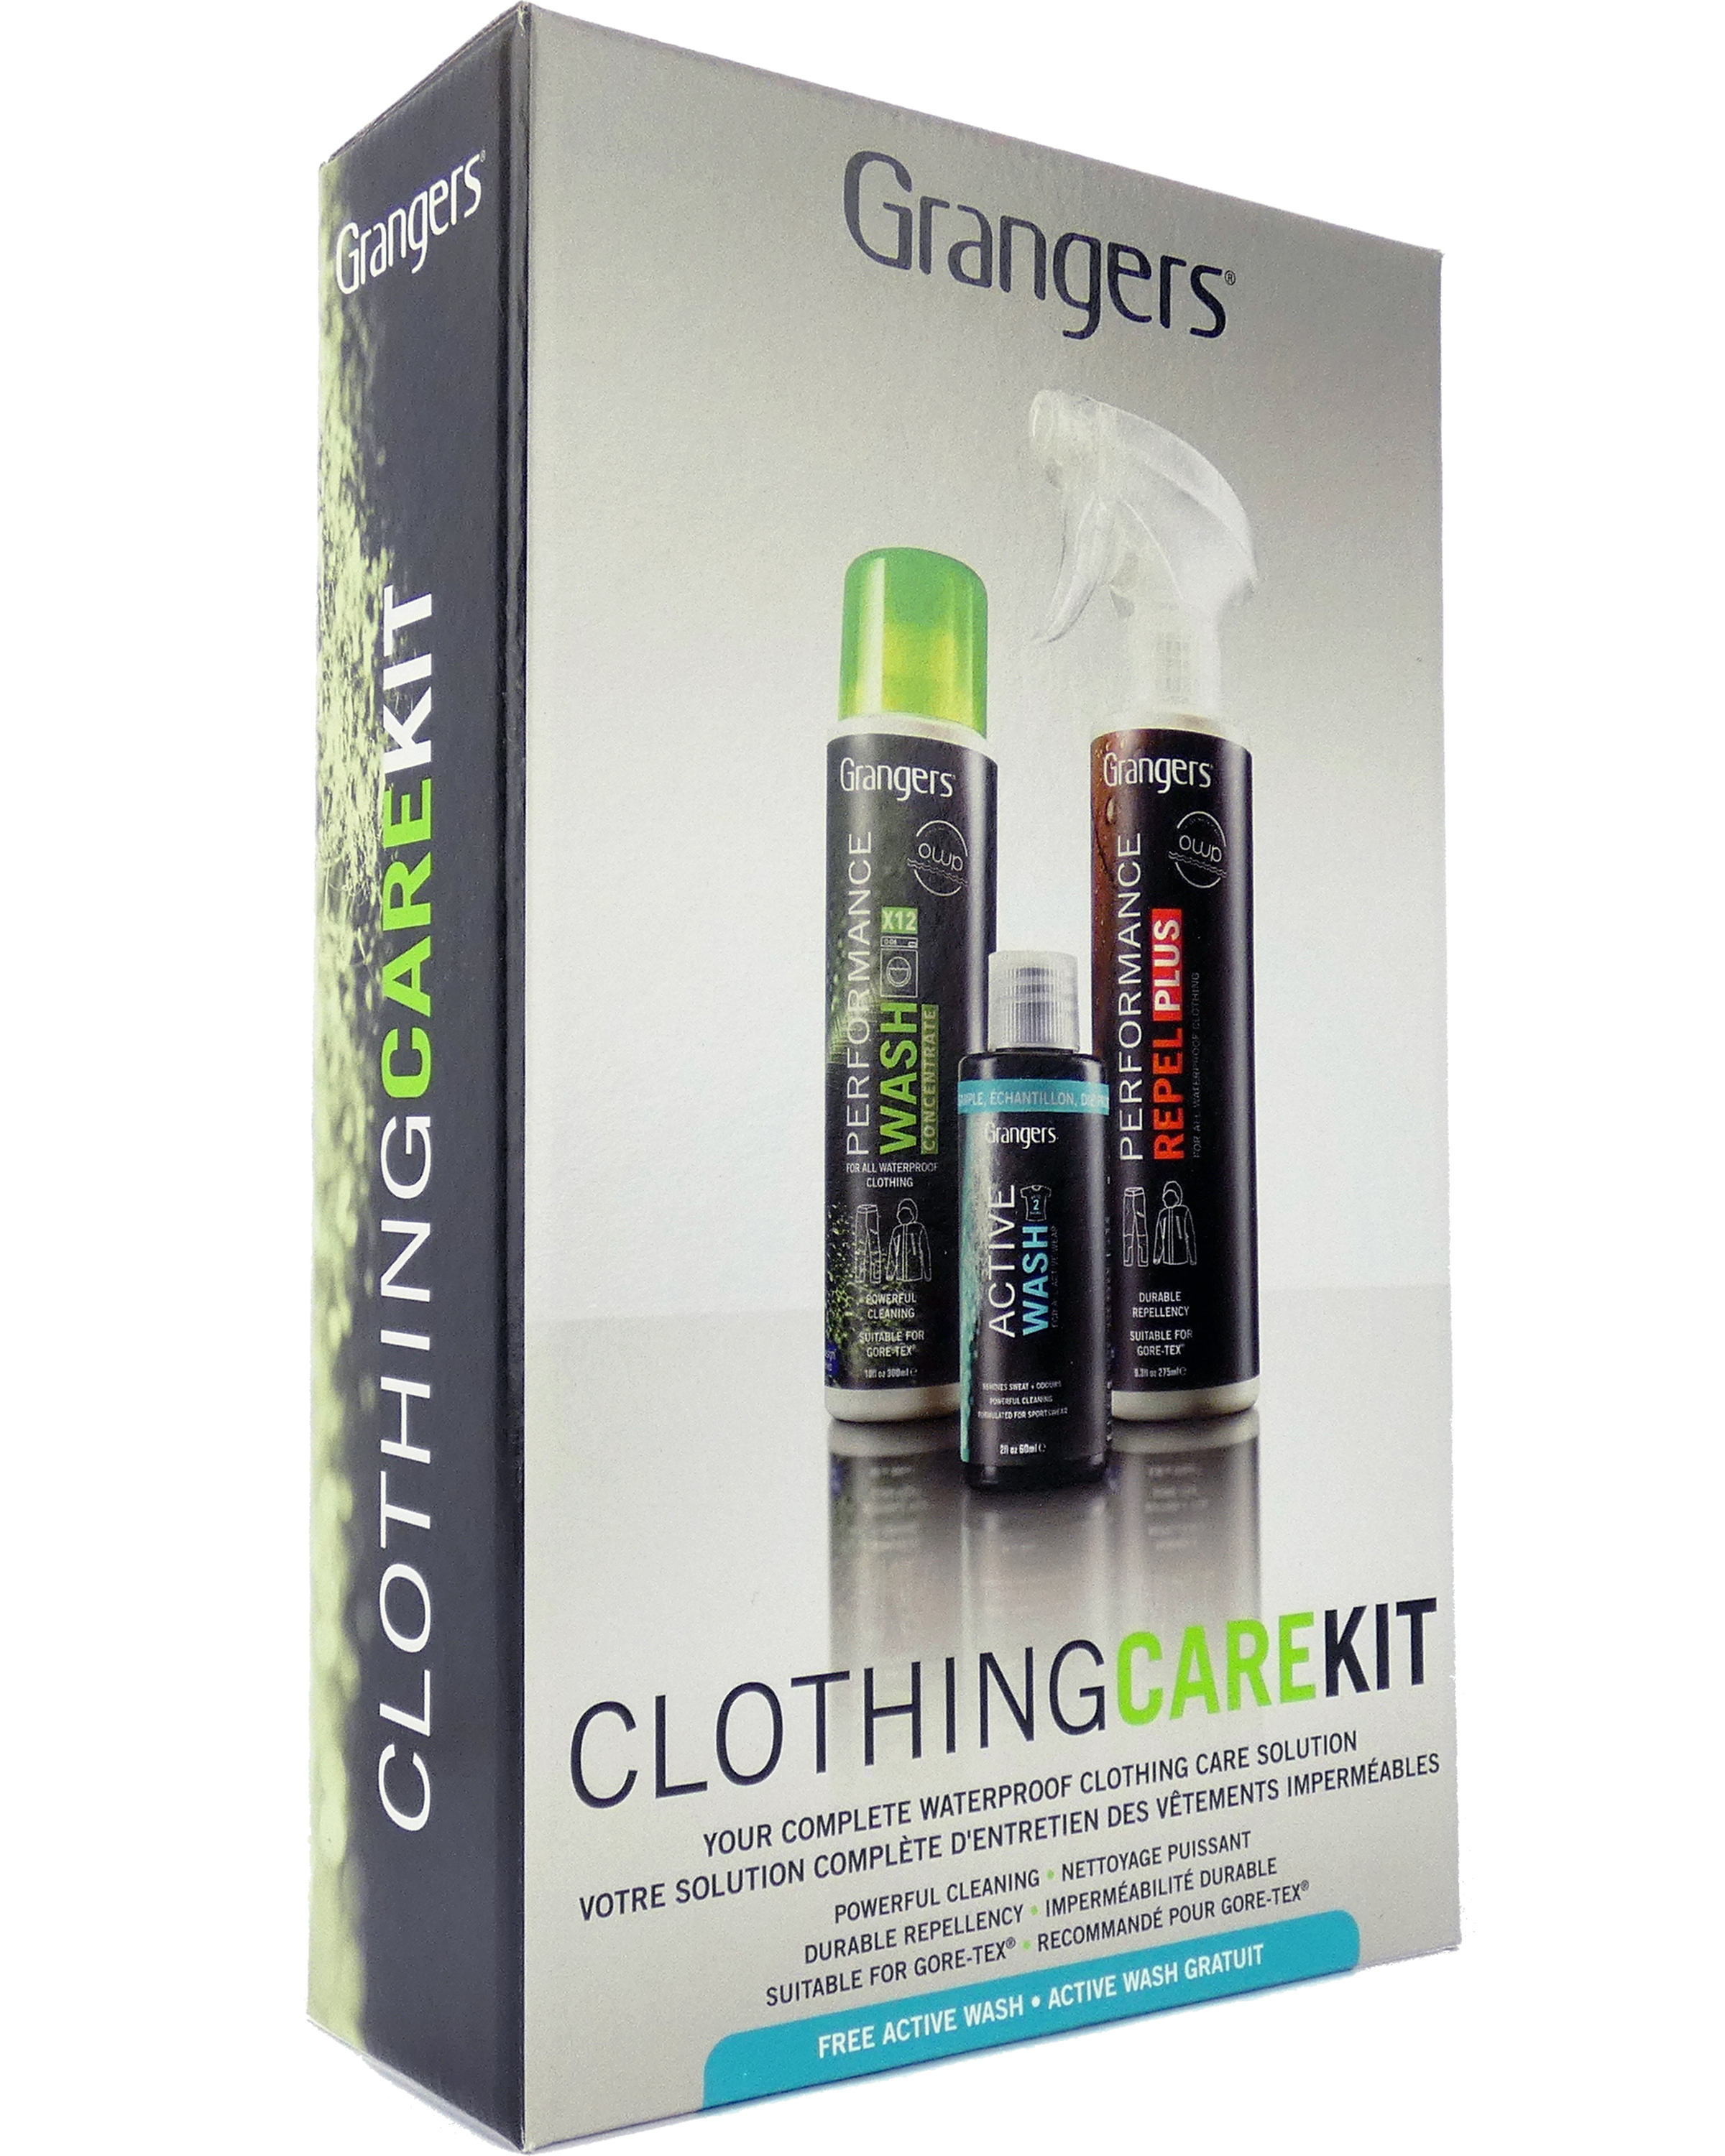 Hunting Gear Care and Maintenance with Grangers – KUIU